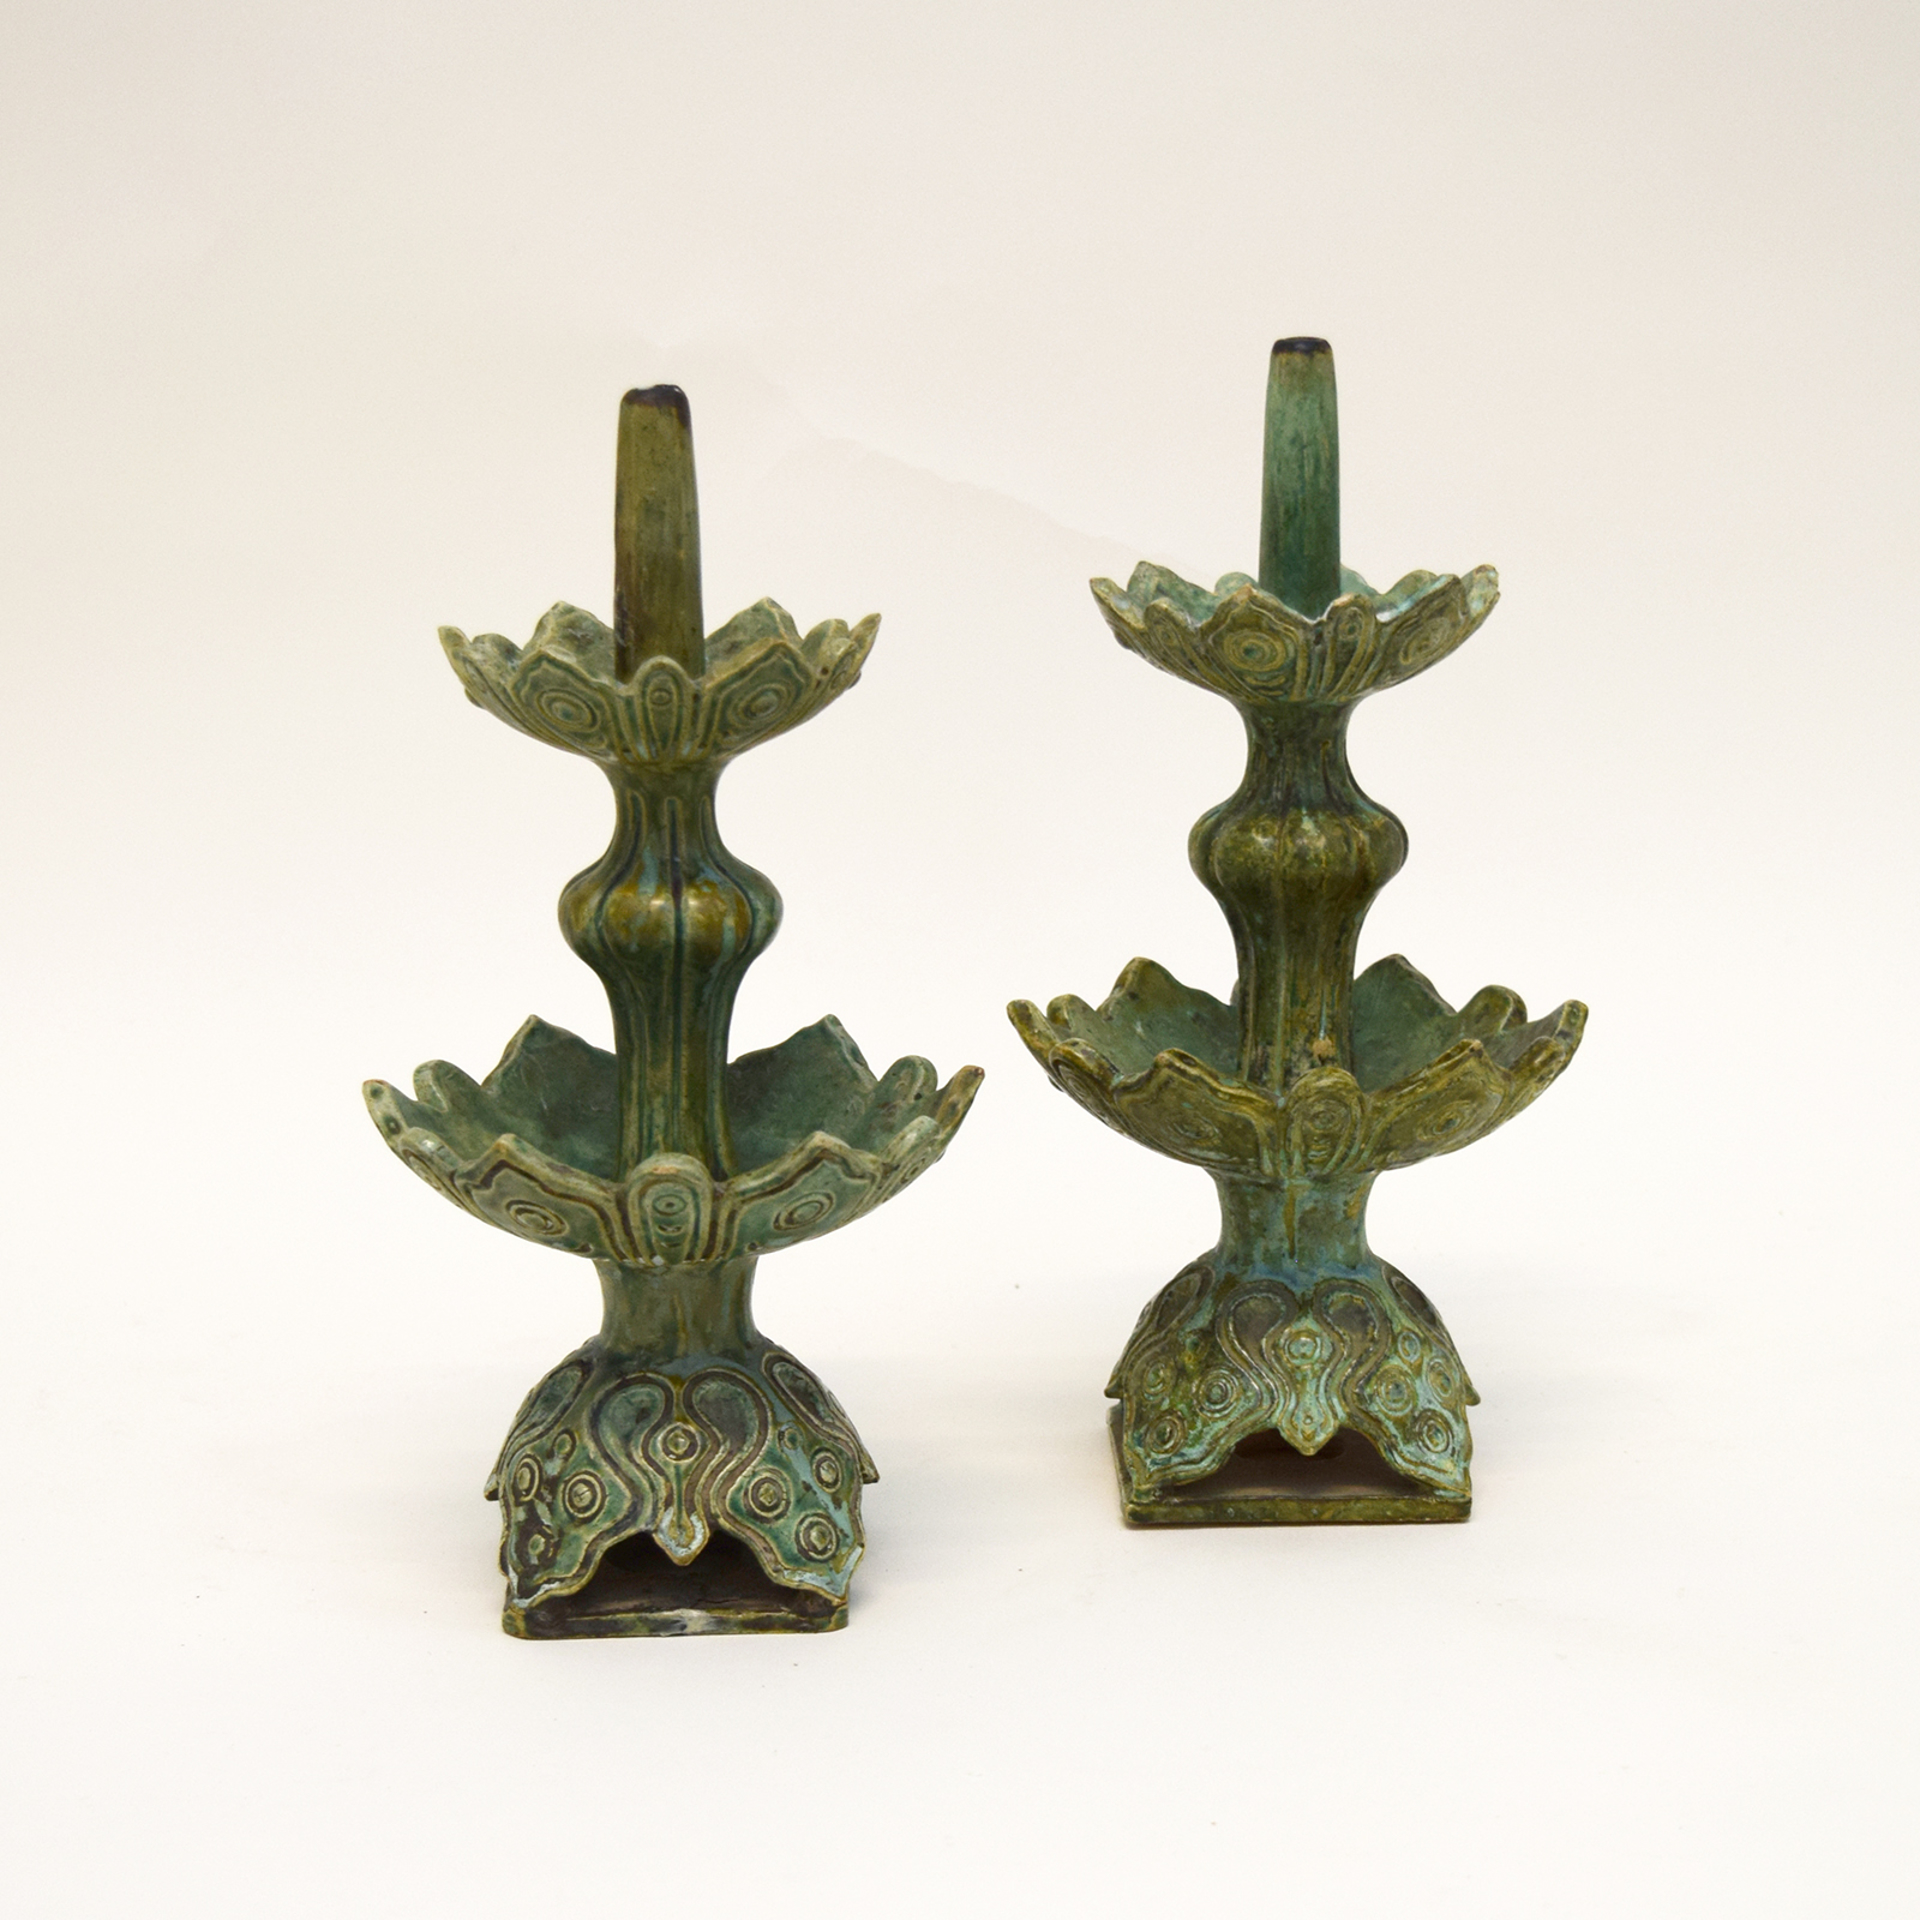 PAIR OF GREEN GLAZED POTTERY PRICKET CANDLESTICKS